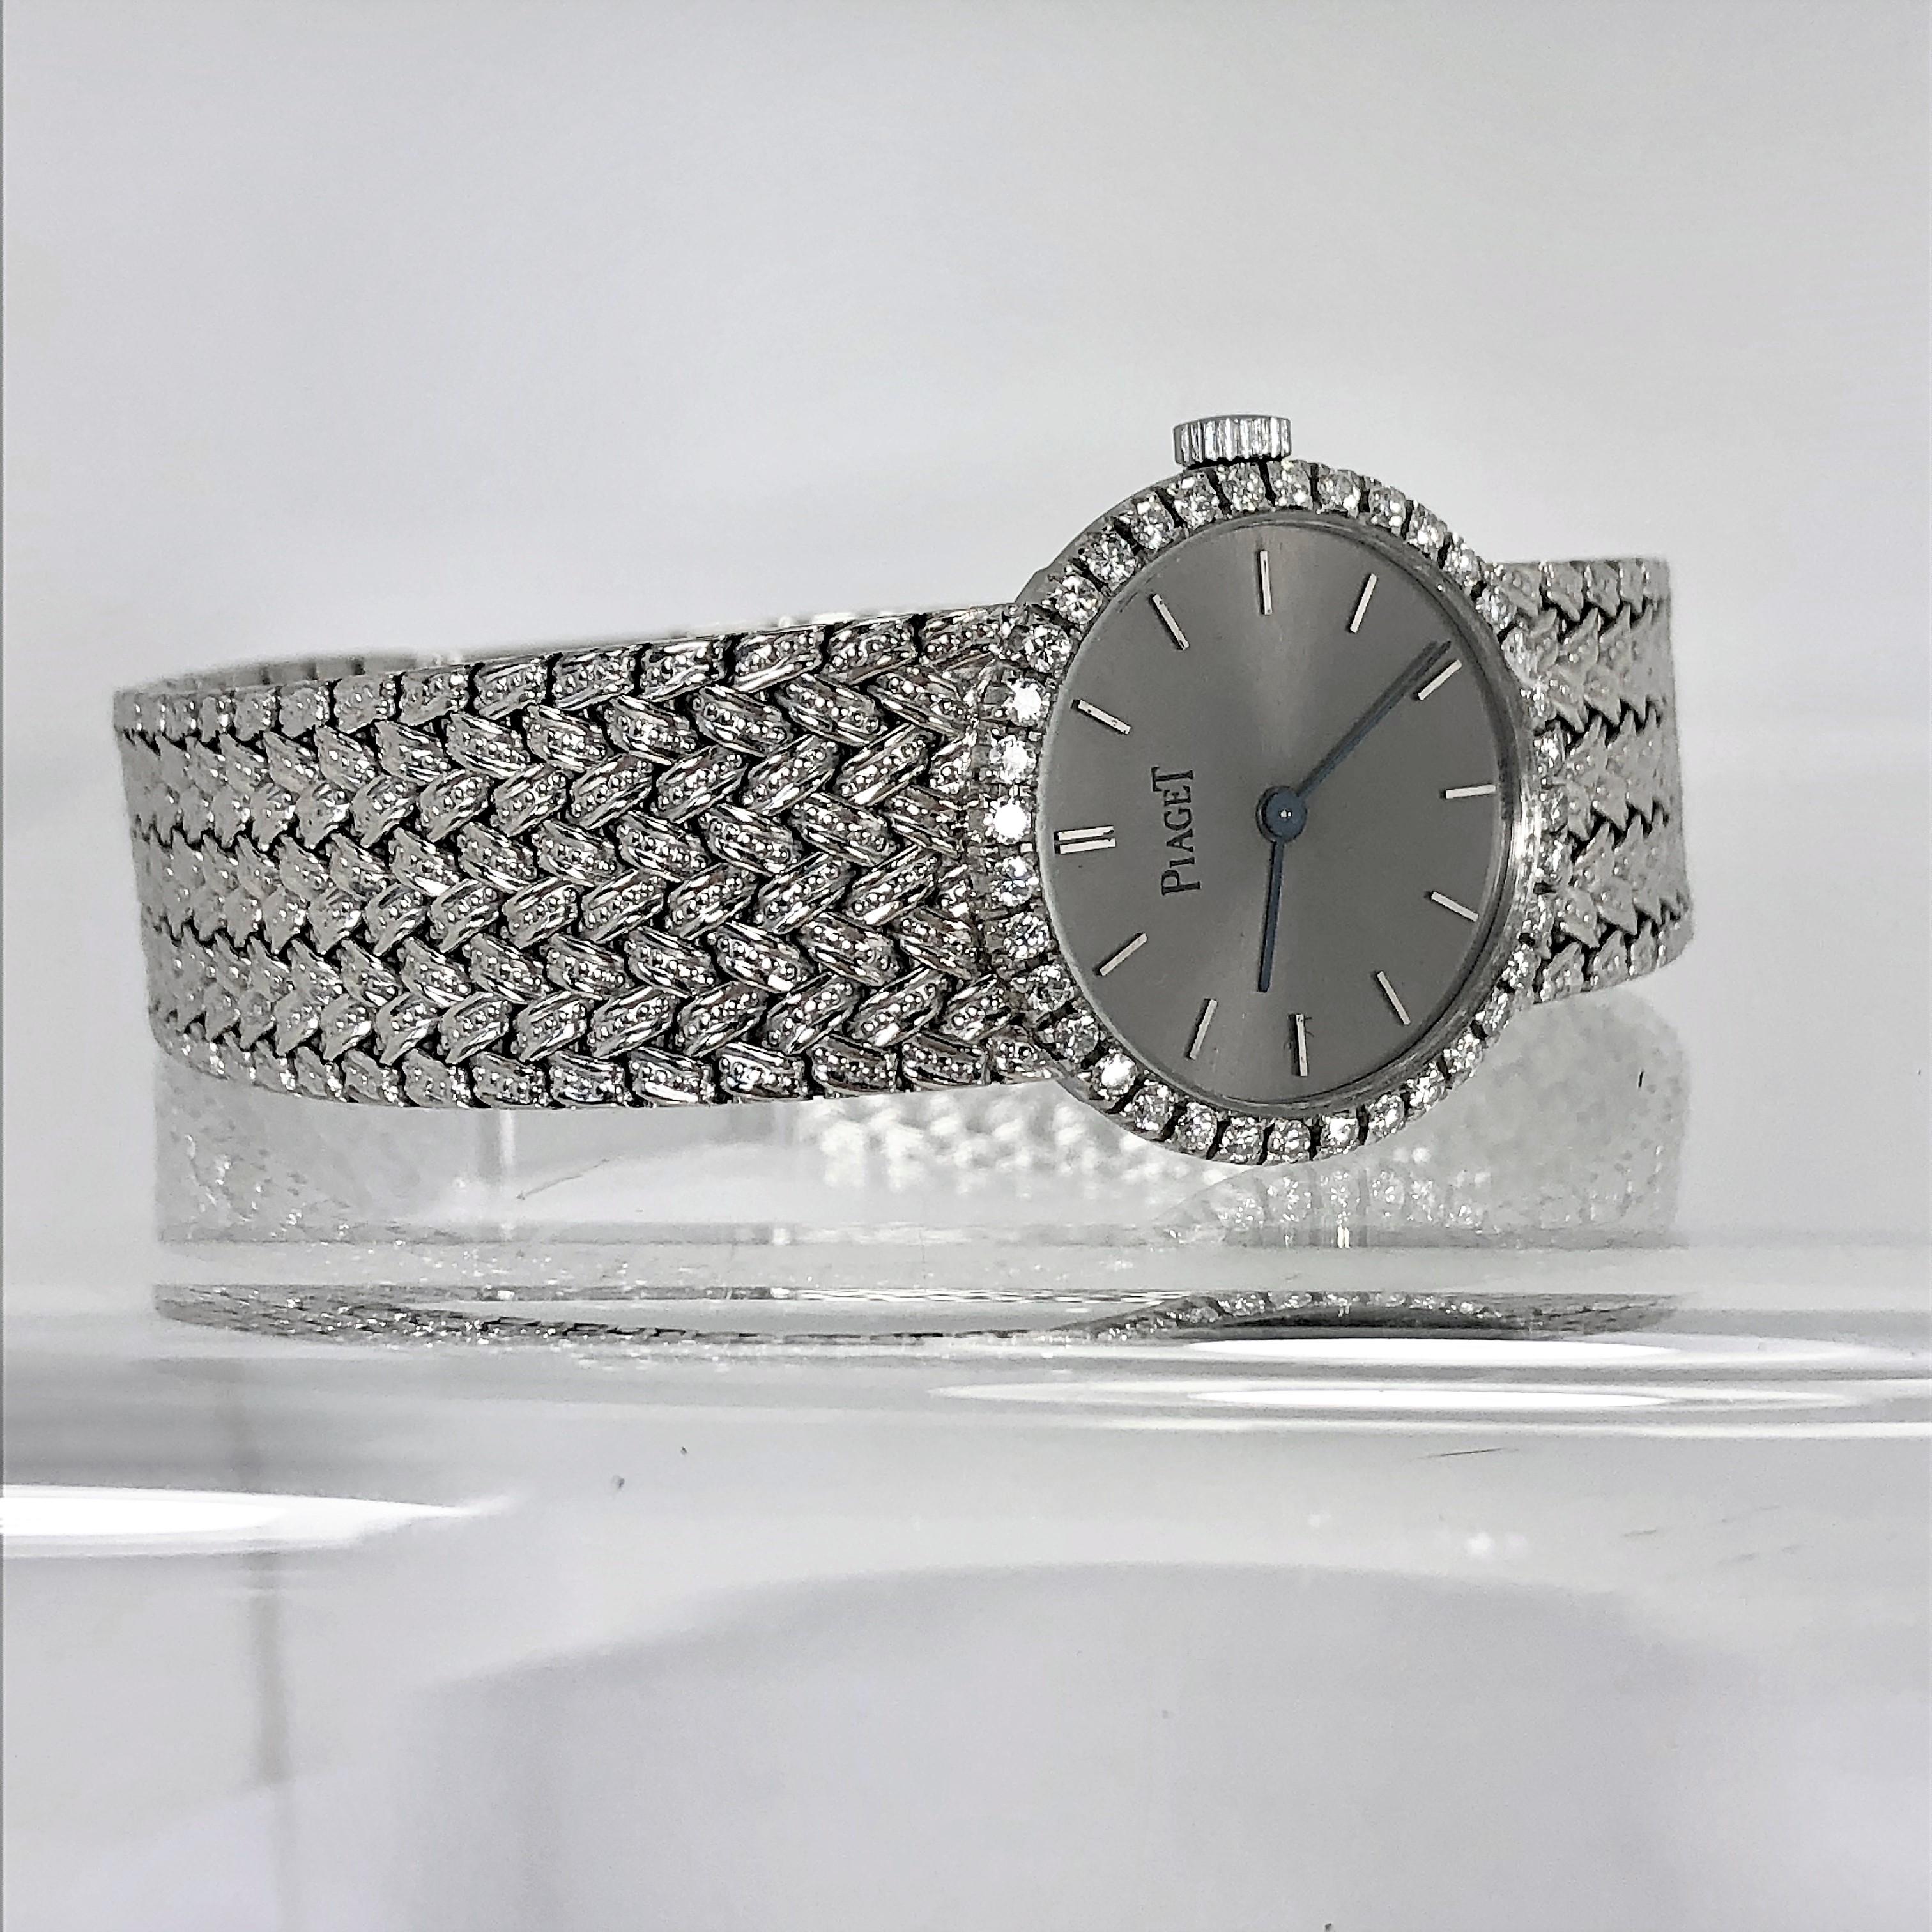 Ladies Piaget Watch with Slate Grey Dial, Diamond Bezel and Unique Braided Band 2